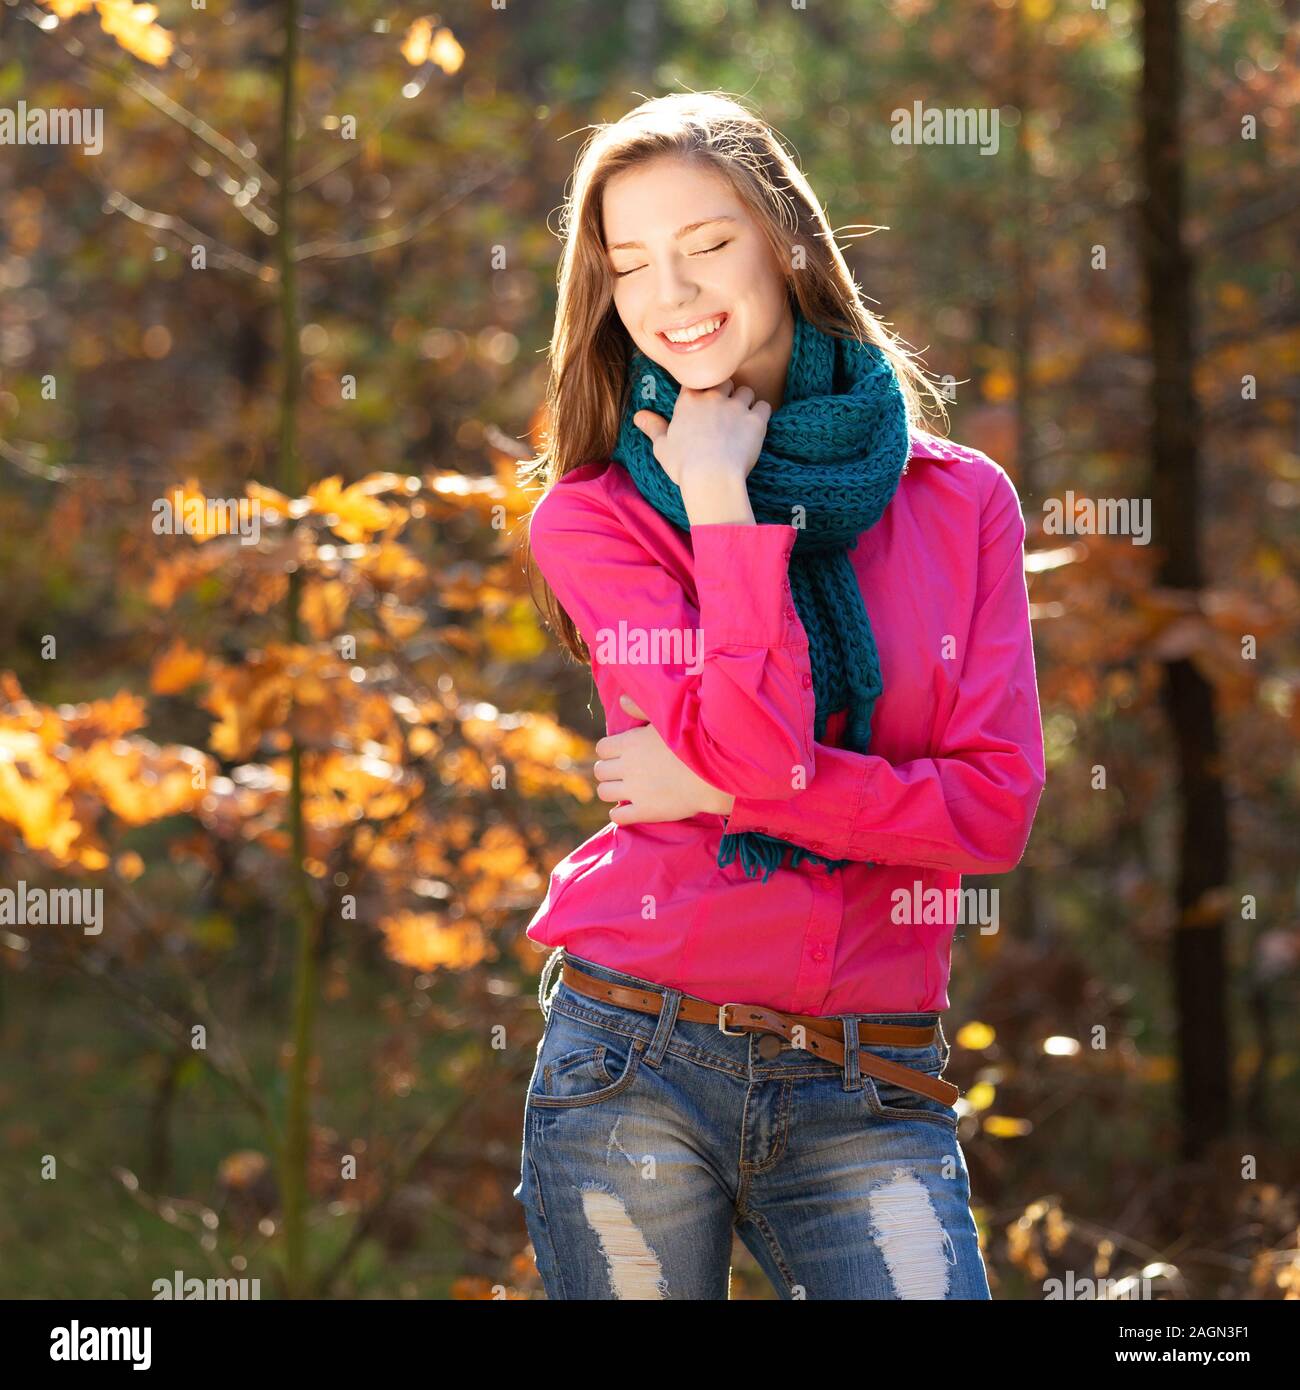 Smiling young girl in the autumn park Stock Photo